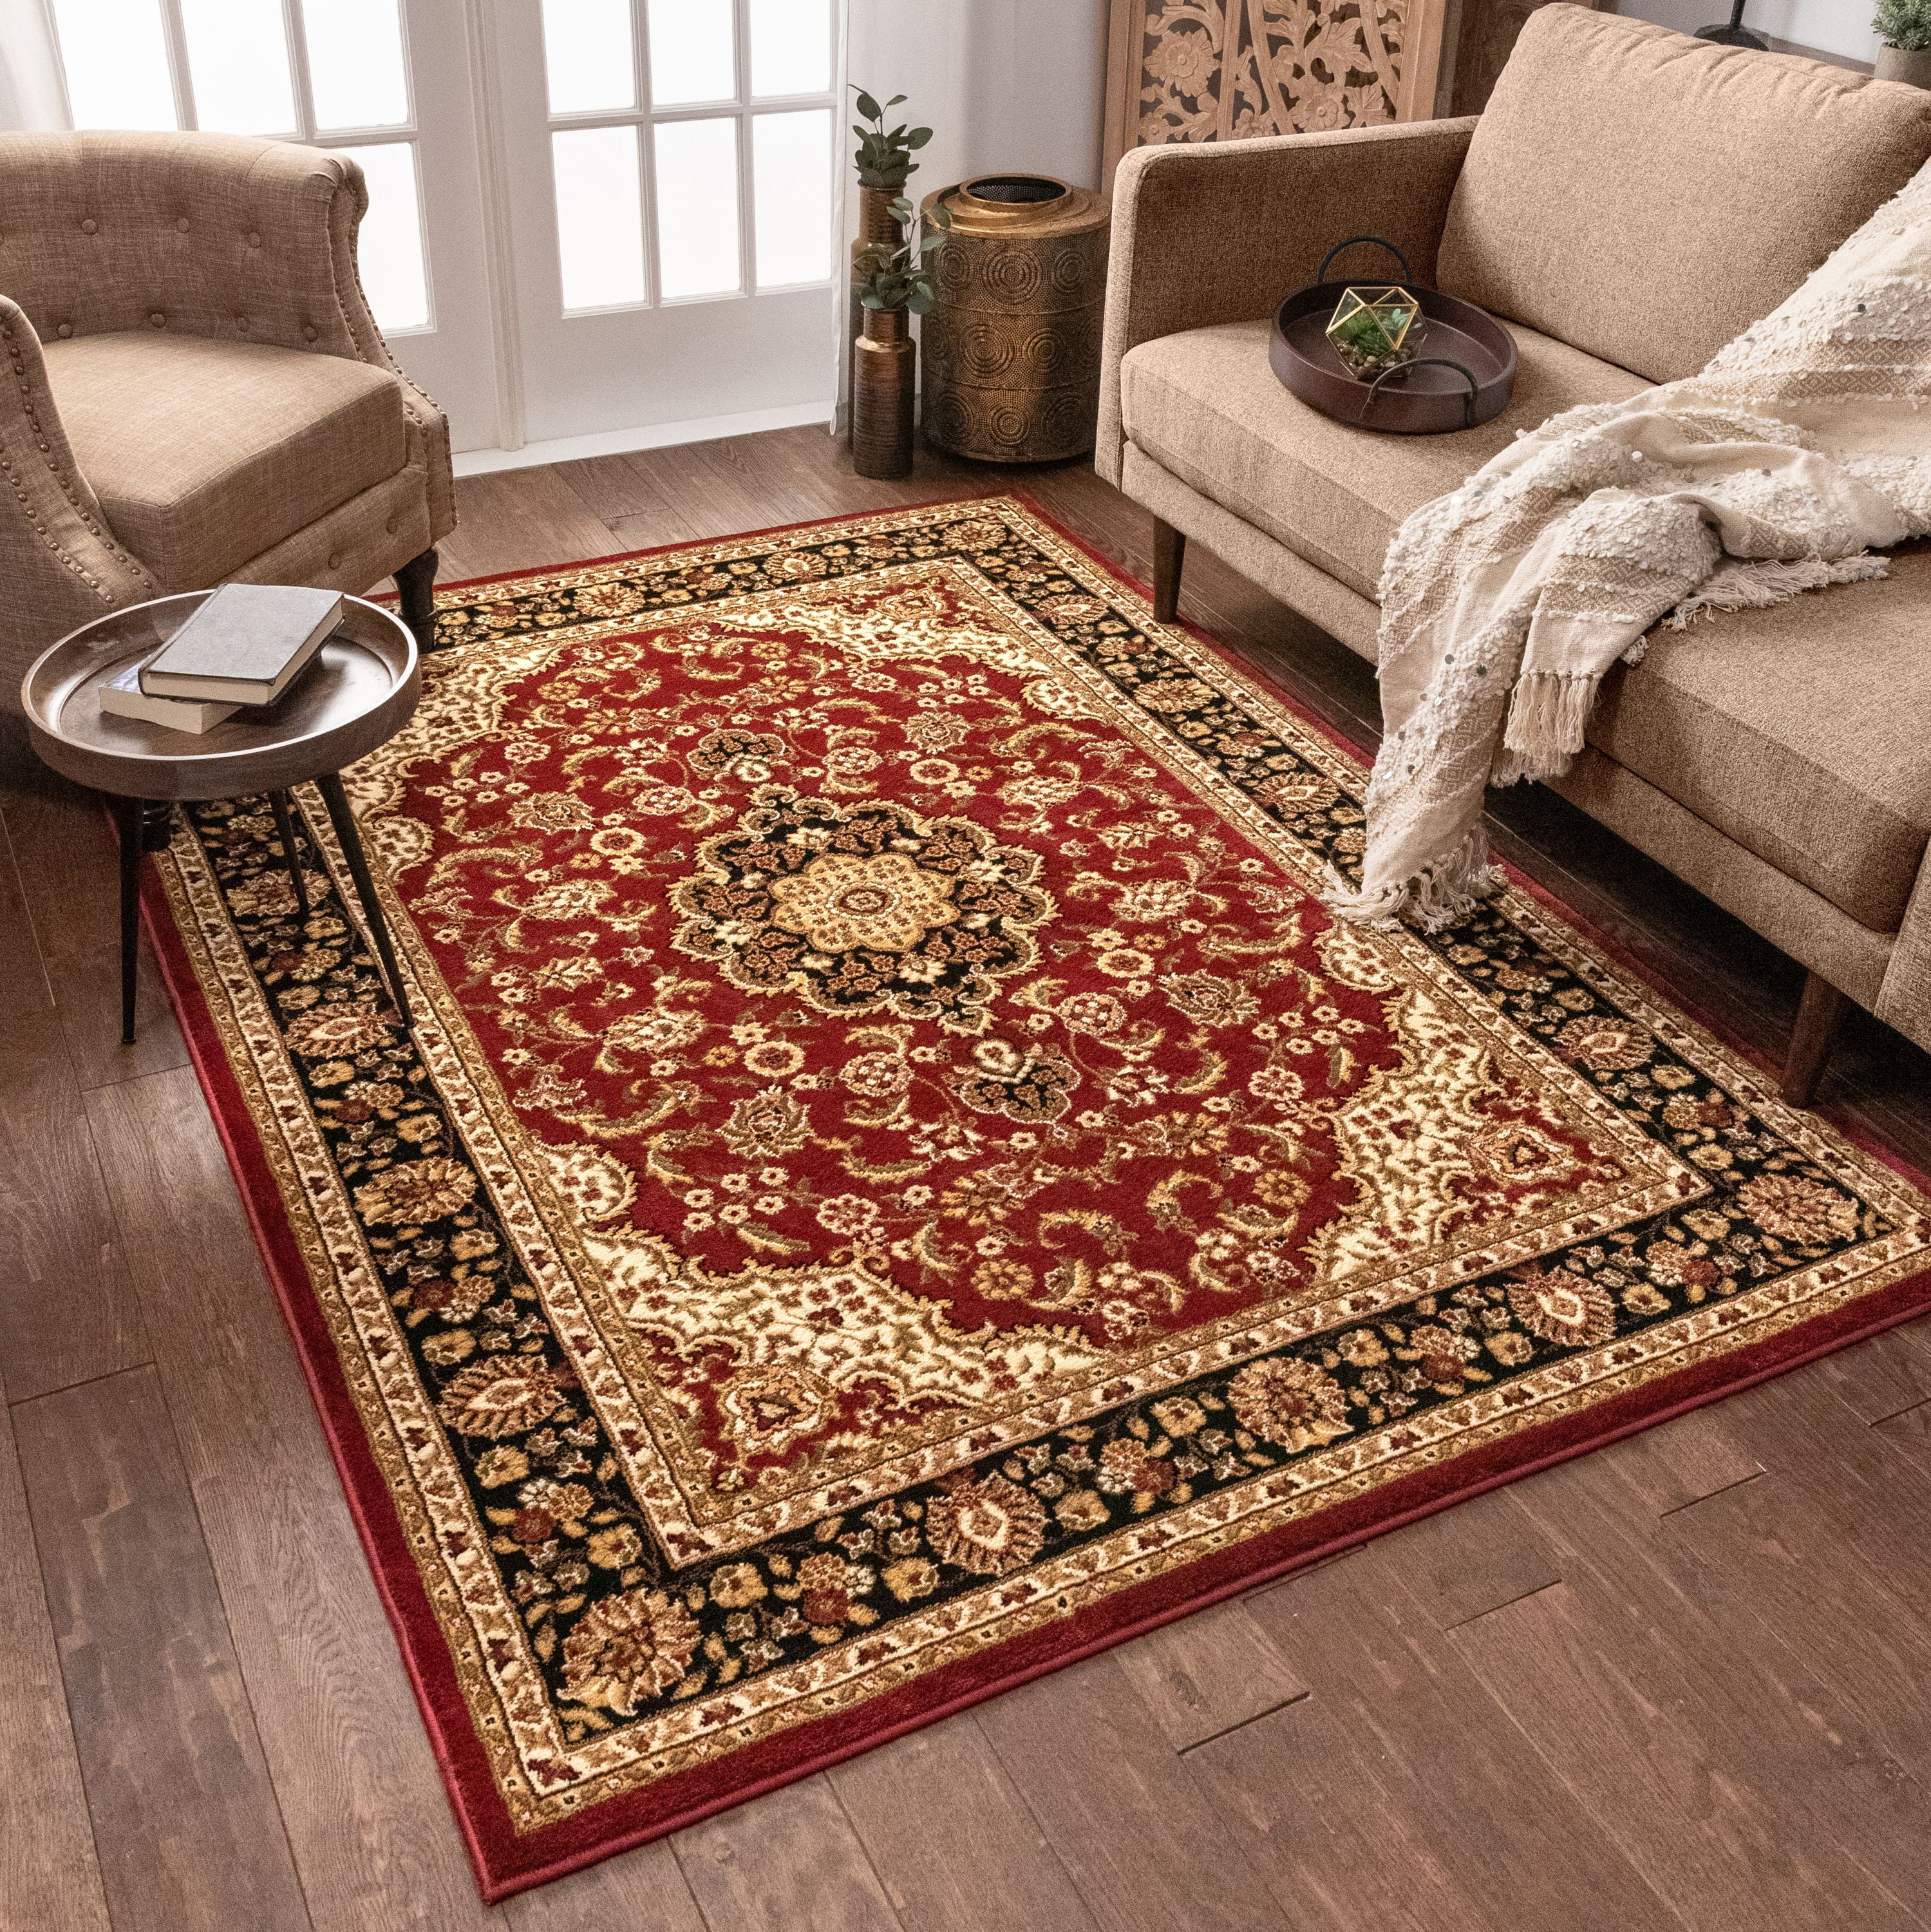 Well Woven Barclay Medallion Kashan Red Traditional Area Rug 3'11'' X 5